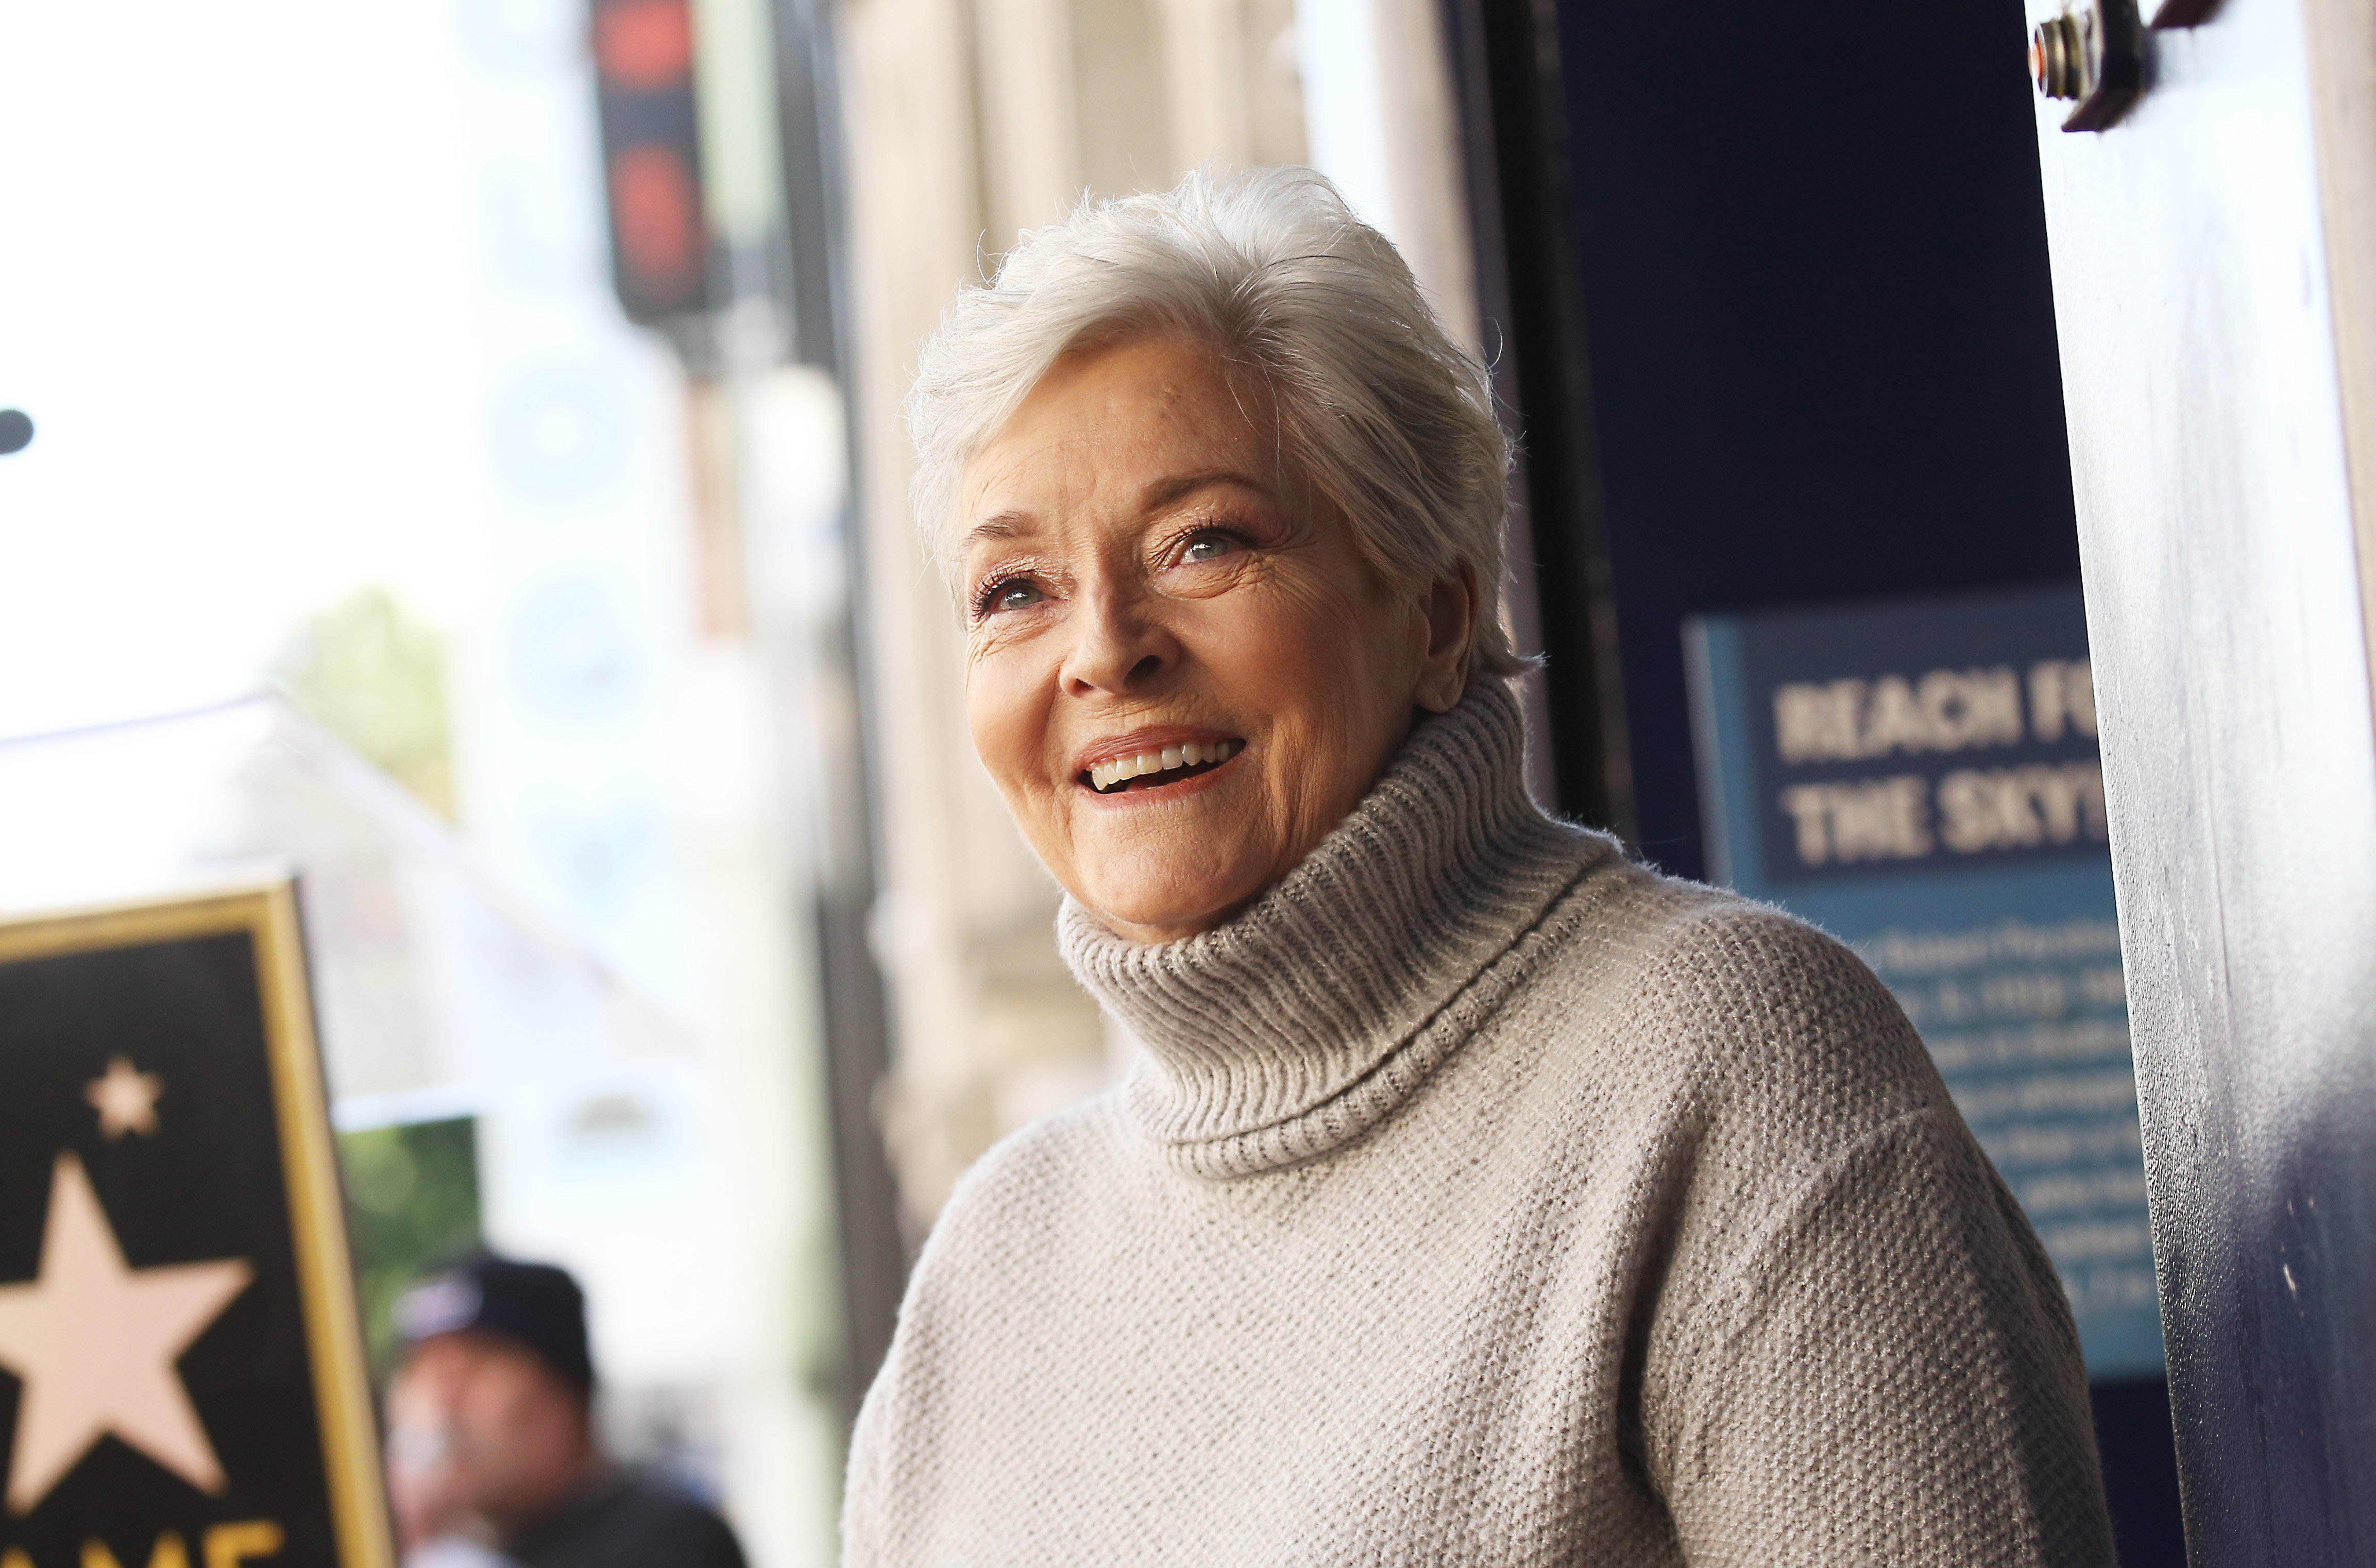 Lee Meriwether attends the ceremony honoring Burt Ward with A Star on the Hollywood Walk of Fame held on January 09, 2020 | Photo: GettyImages